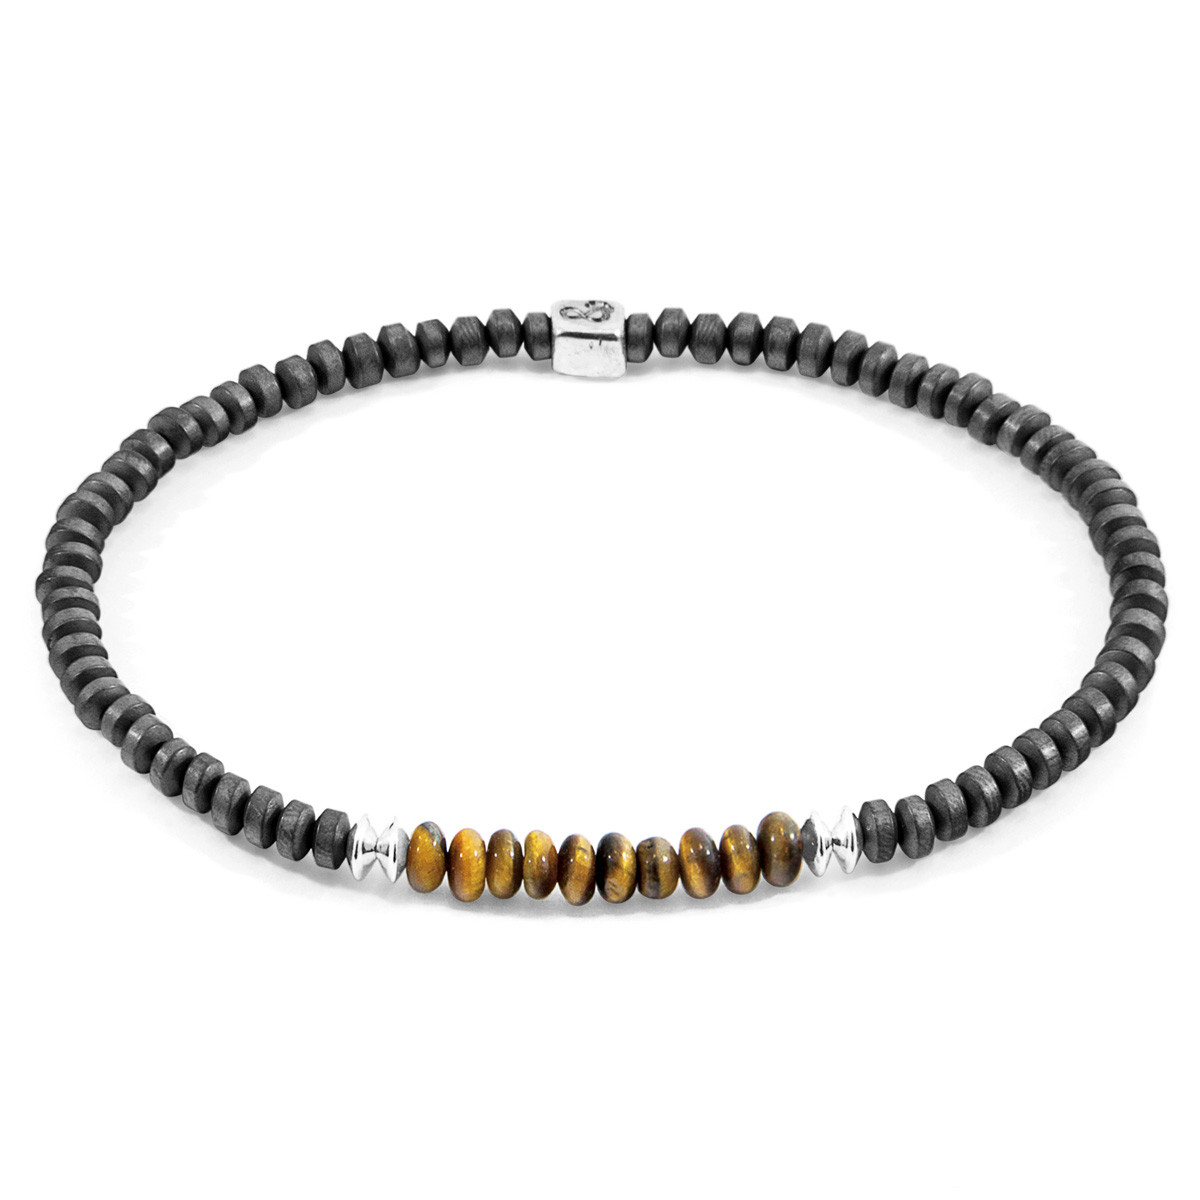 Brown Tigers Eye Paralana Silver and Stone Bracelet